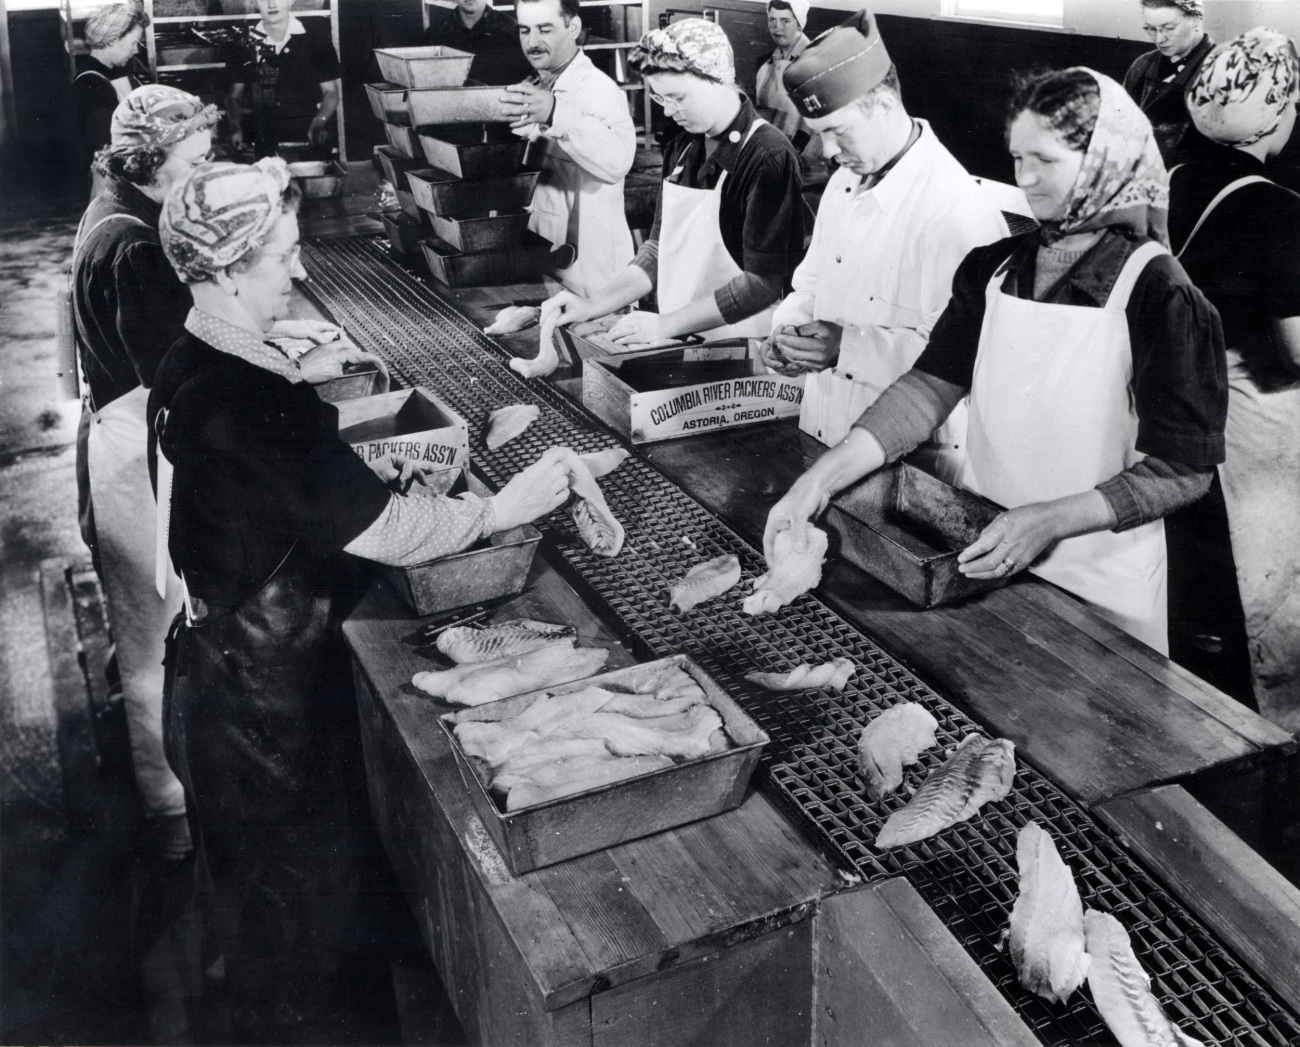 Sorting and packing fillets for freezing - note veteran with insignia onassembly line